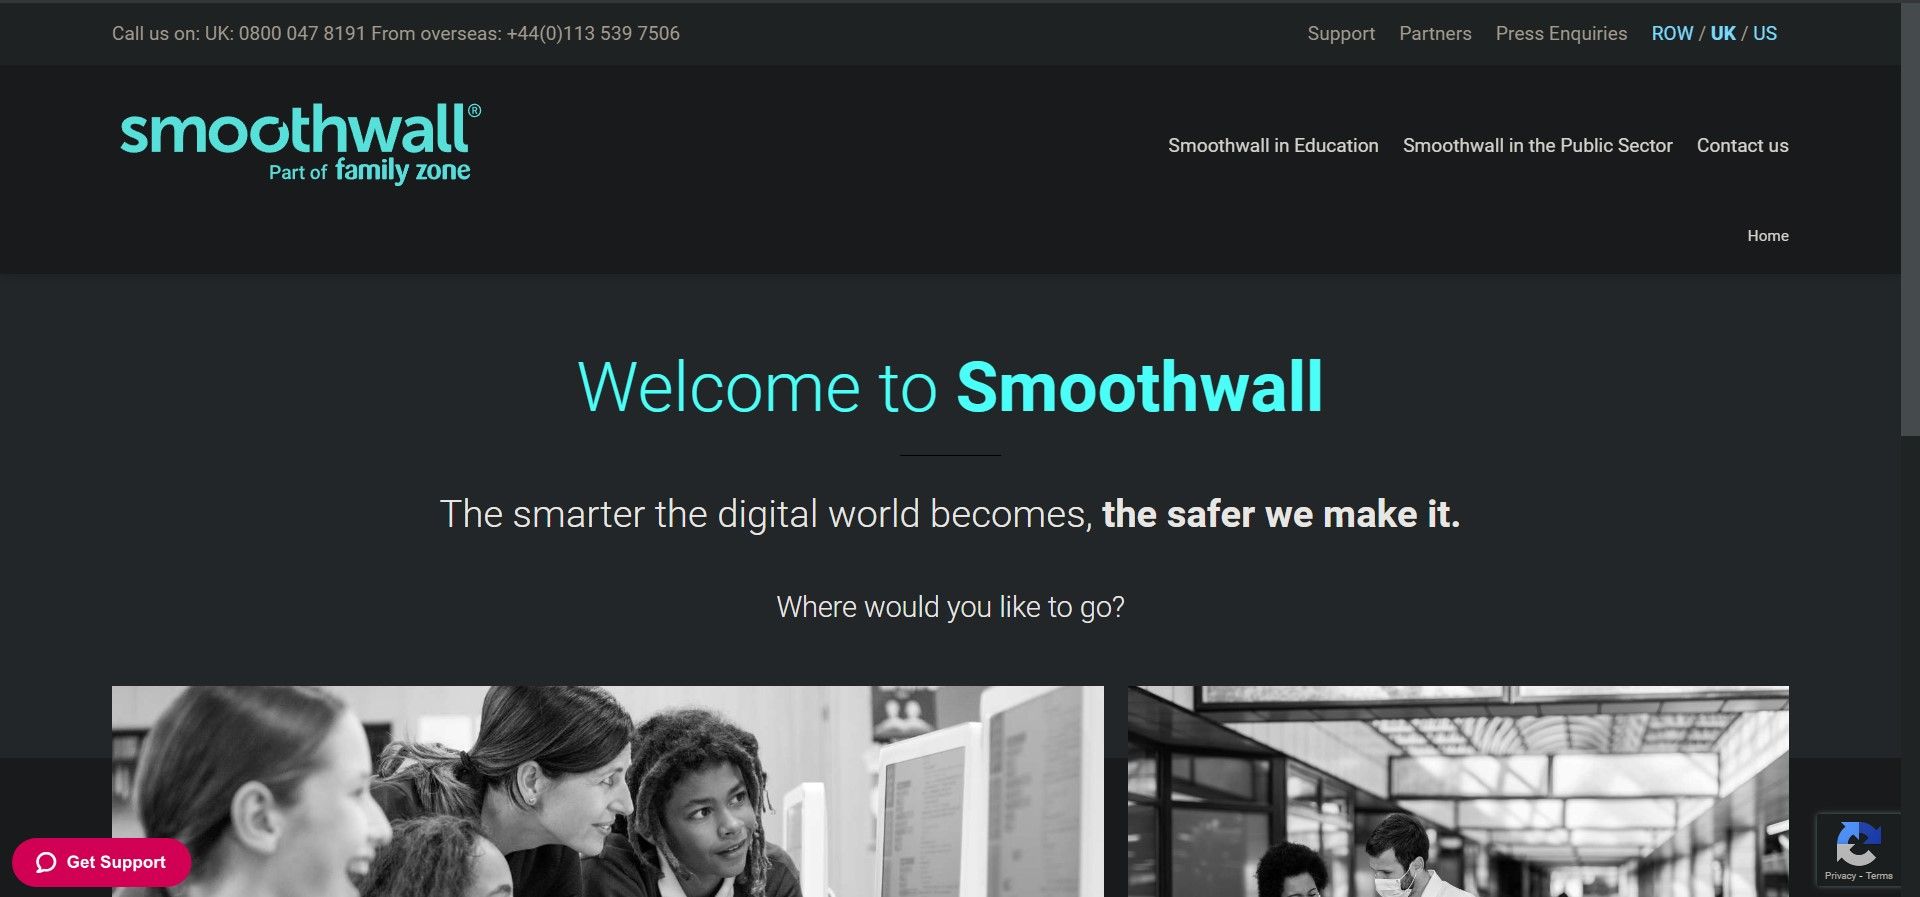 Softwall Website Home Page